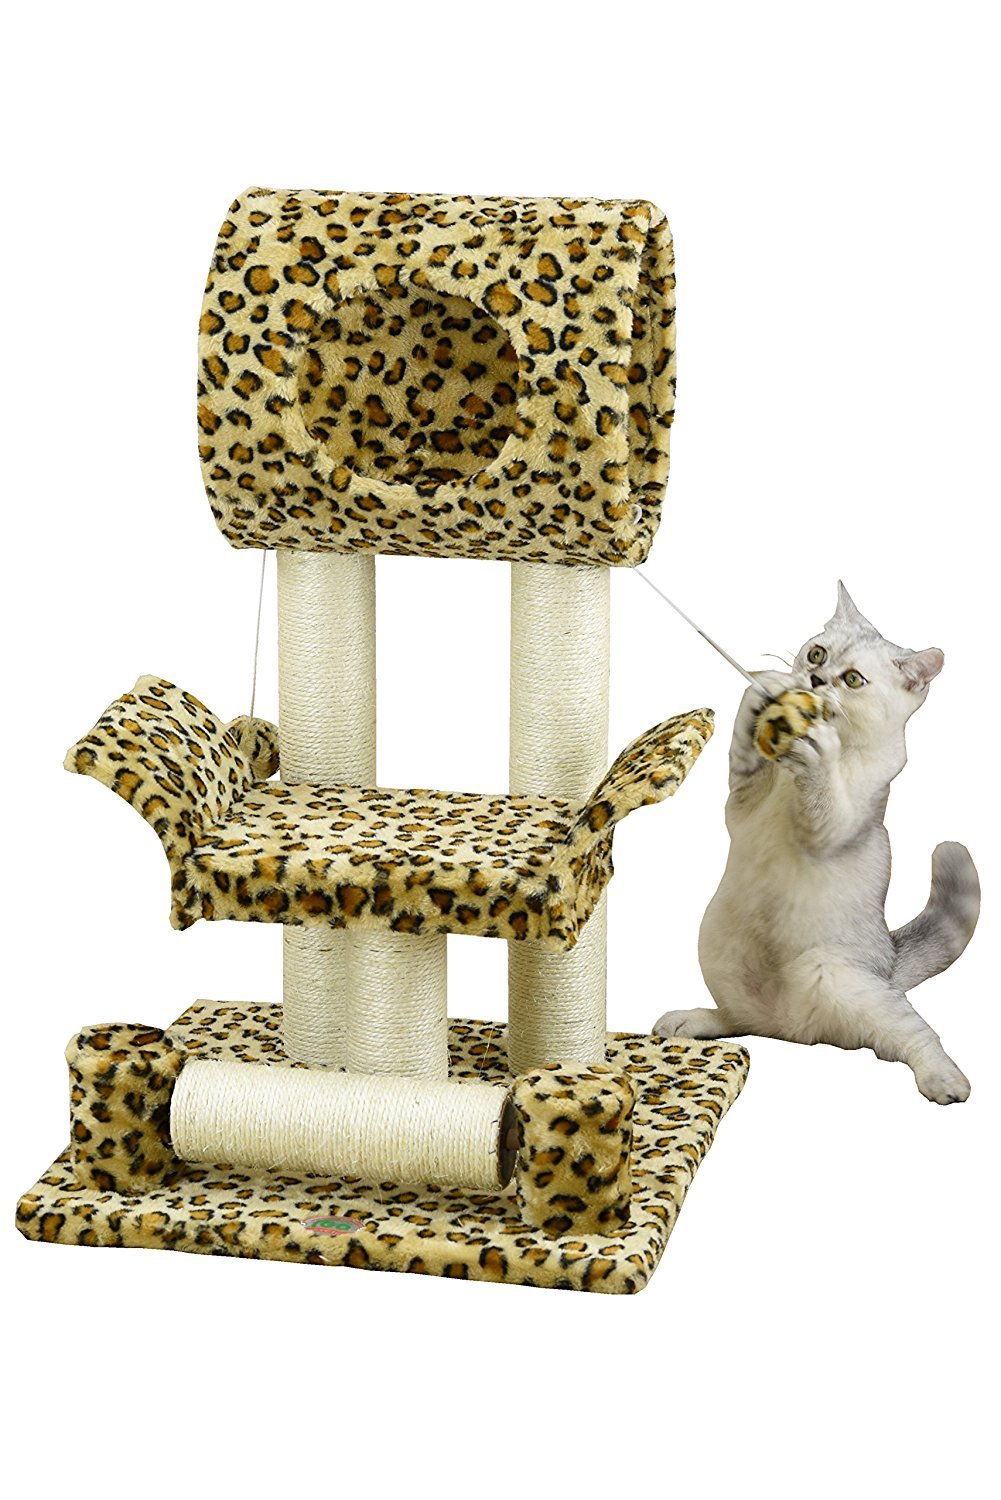 Show full-size image of Kitten Cat Pet Tree Condo House Leopard Print Kitty Scratching Post Fur Sisal